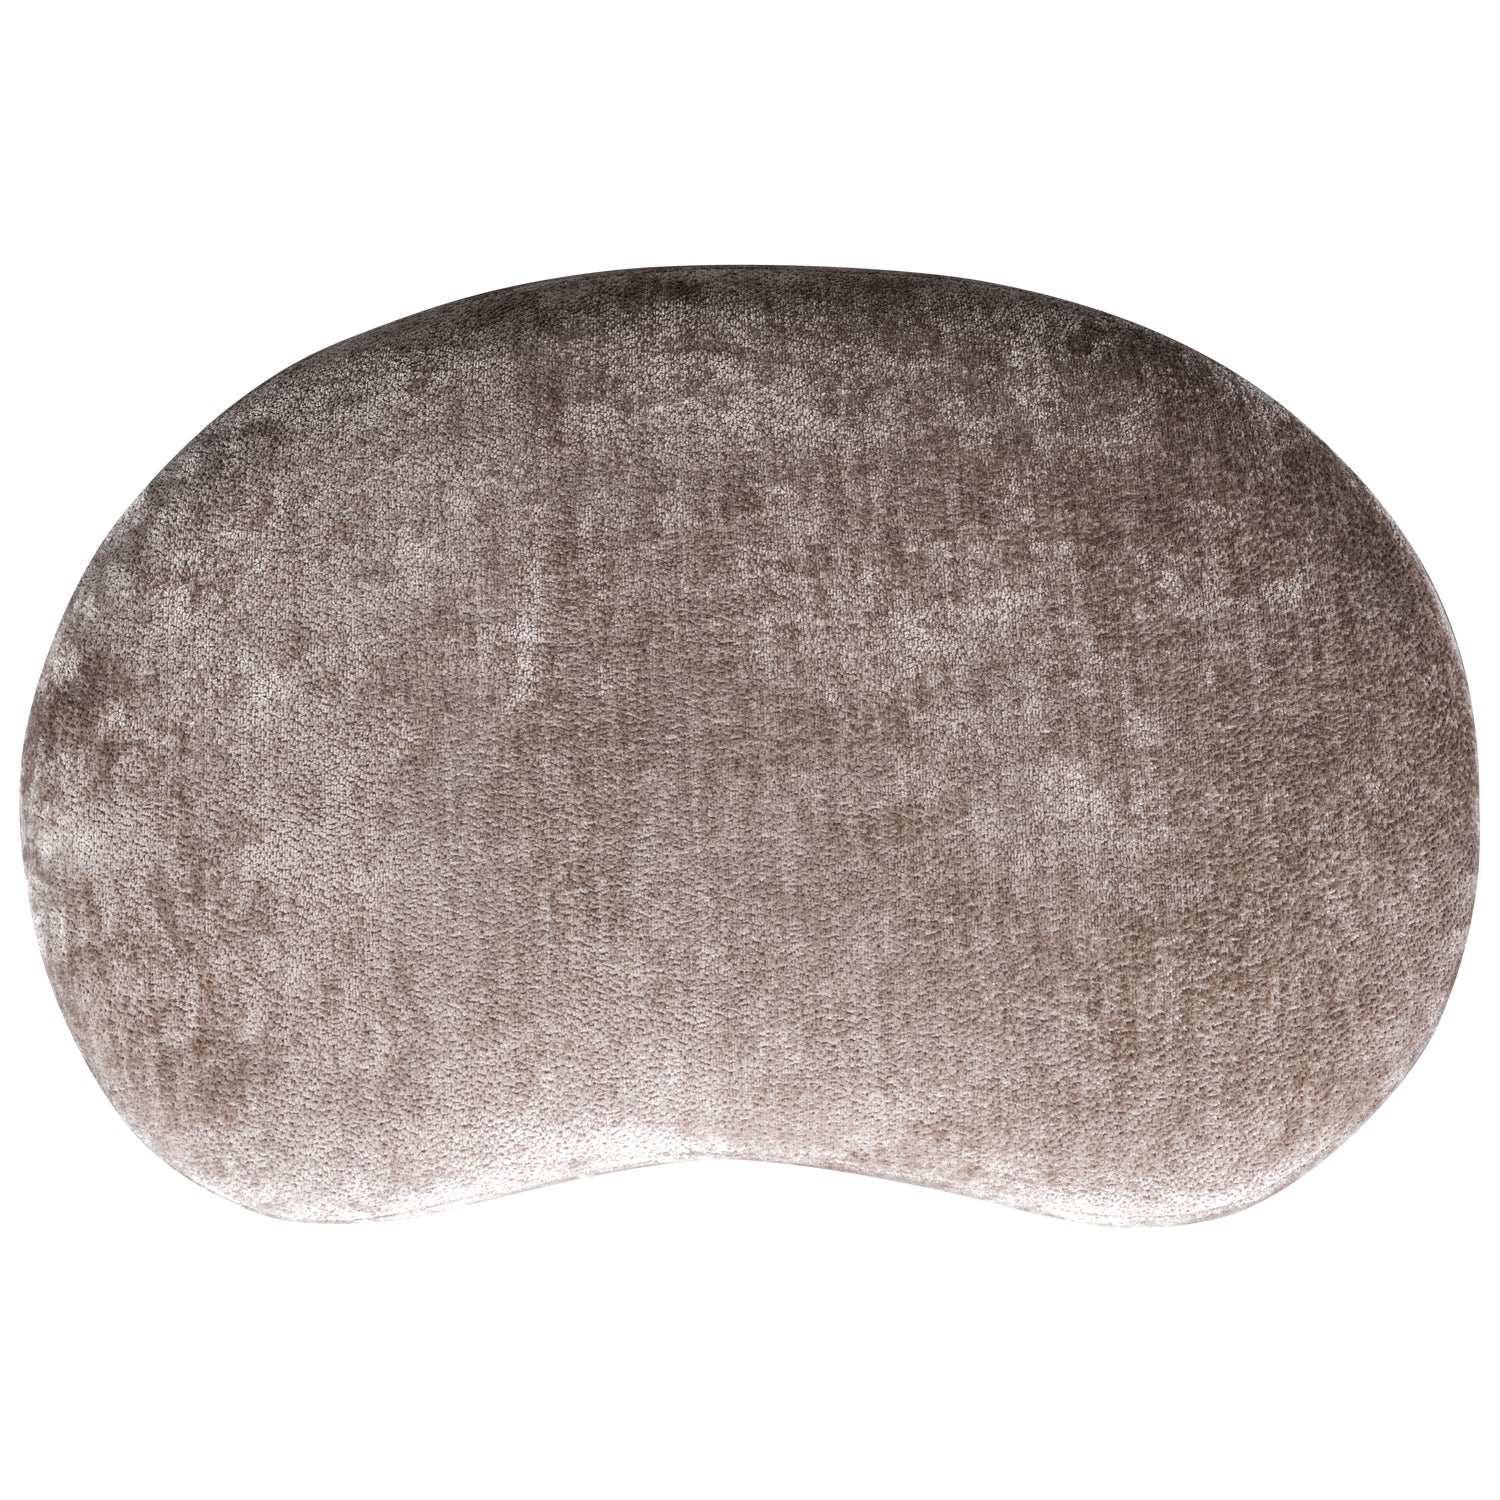 801431-T-05_VS_BP_Popular_hocker_taupe.png?auto=webp&format=png&width=1500&height=1500